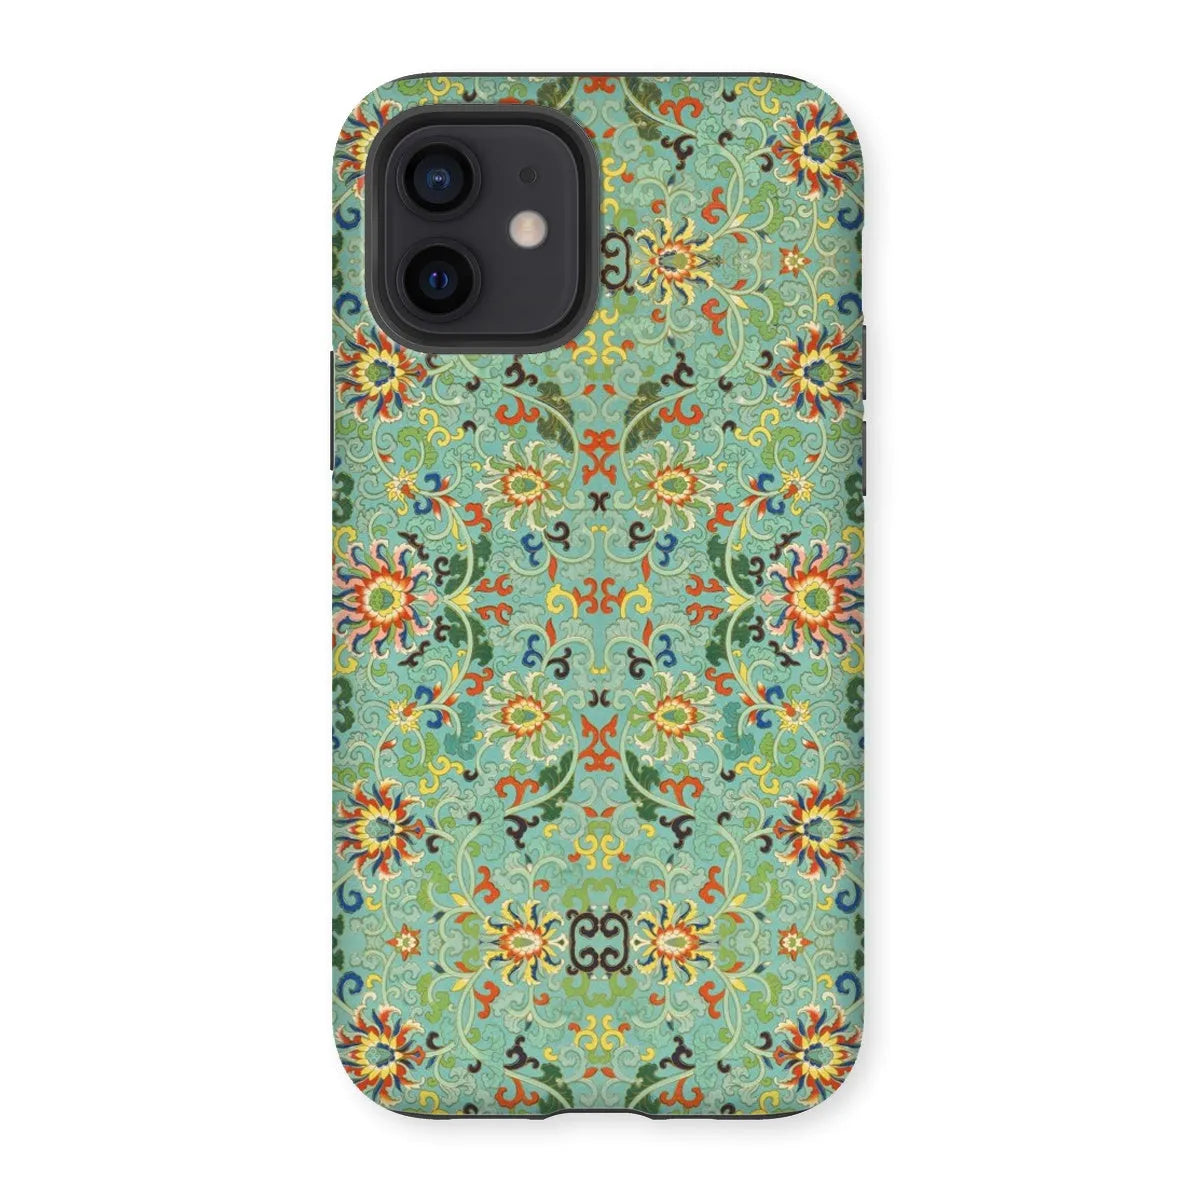 Lotus Candy - Chinese Aesthetic Pattern Art Phone Case - Iphone 12 / Matte - Mobile Phone Cases - Aesthetic Art